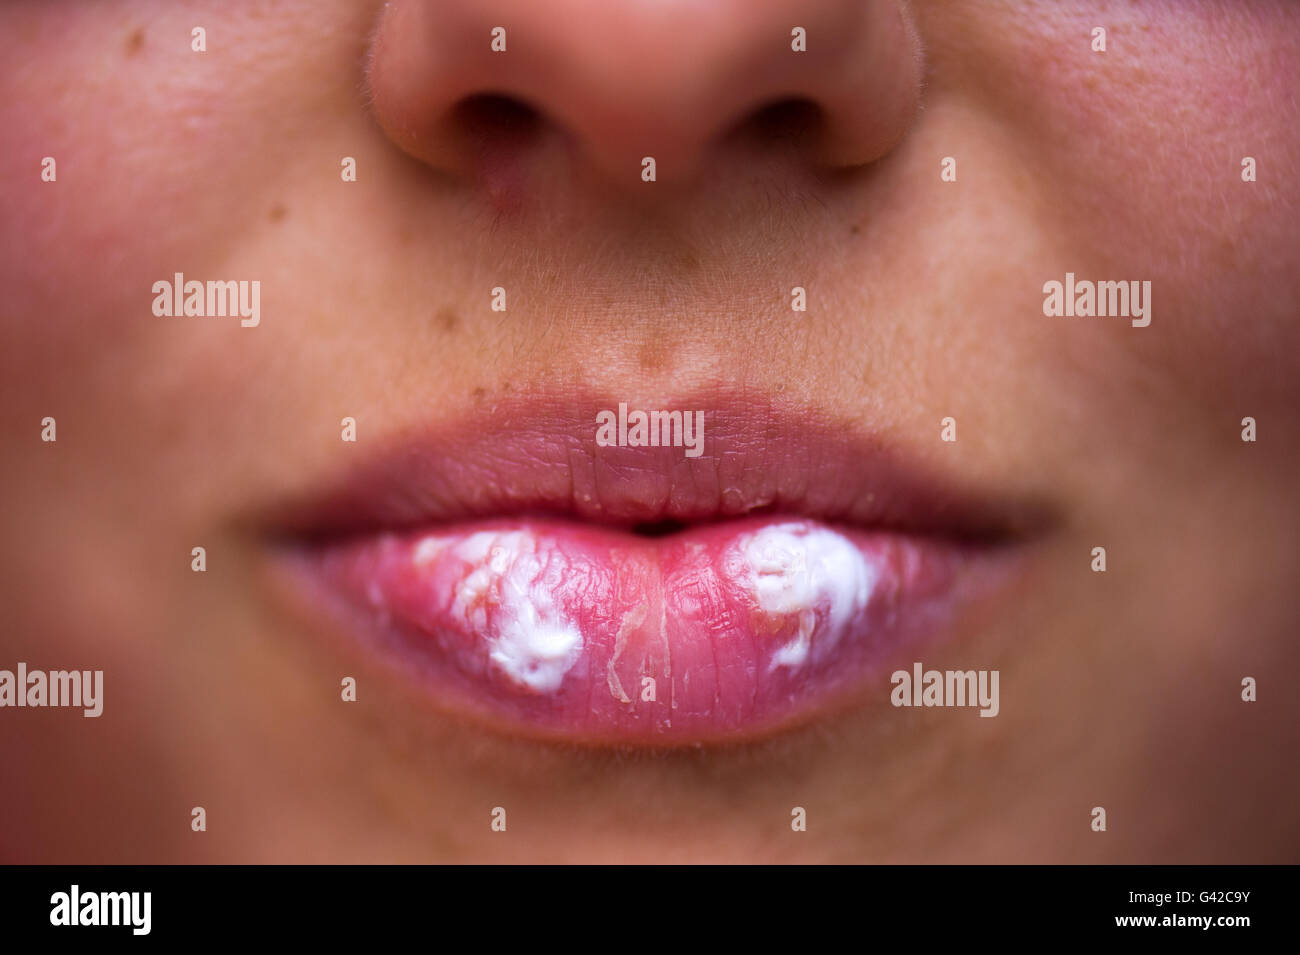 Dresden, Germany. 15th June, 2016. ILLUSTRATION - A woman with lip herpes (Herpes labialis) has put an ointment on the infected places. In the vernacular, symptoms of an infection with the herpes-simplex-virus type I are called 'fever blisters'. Photo: Arno Burgi/dpa/Alamy Live News Stock Photo